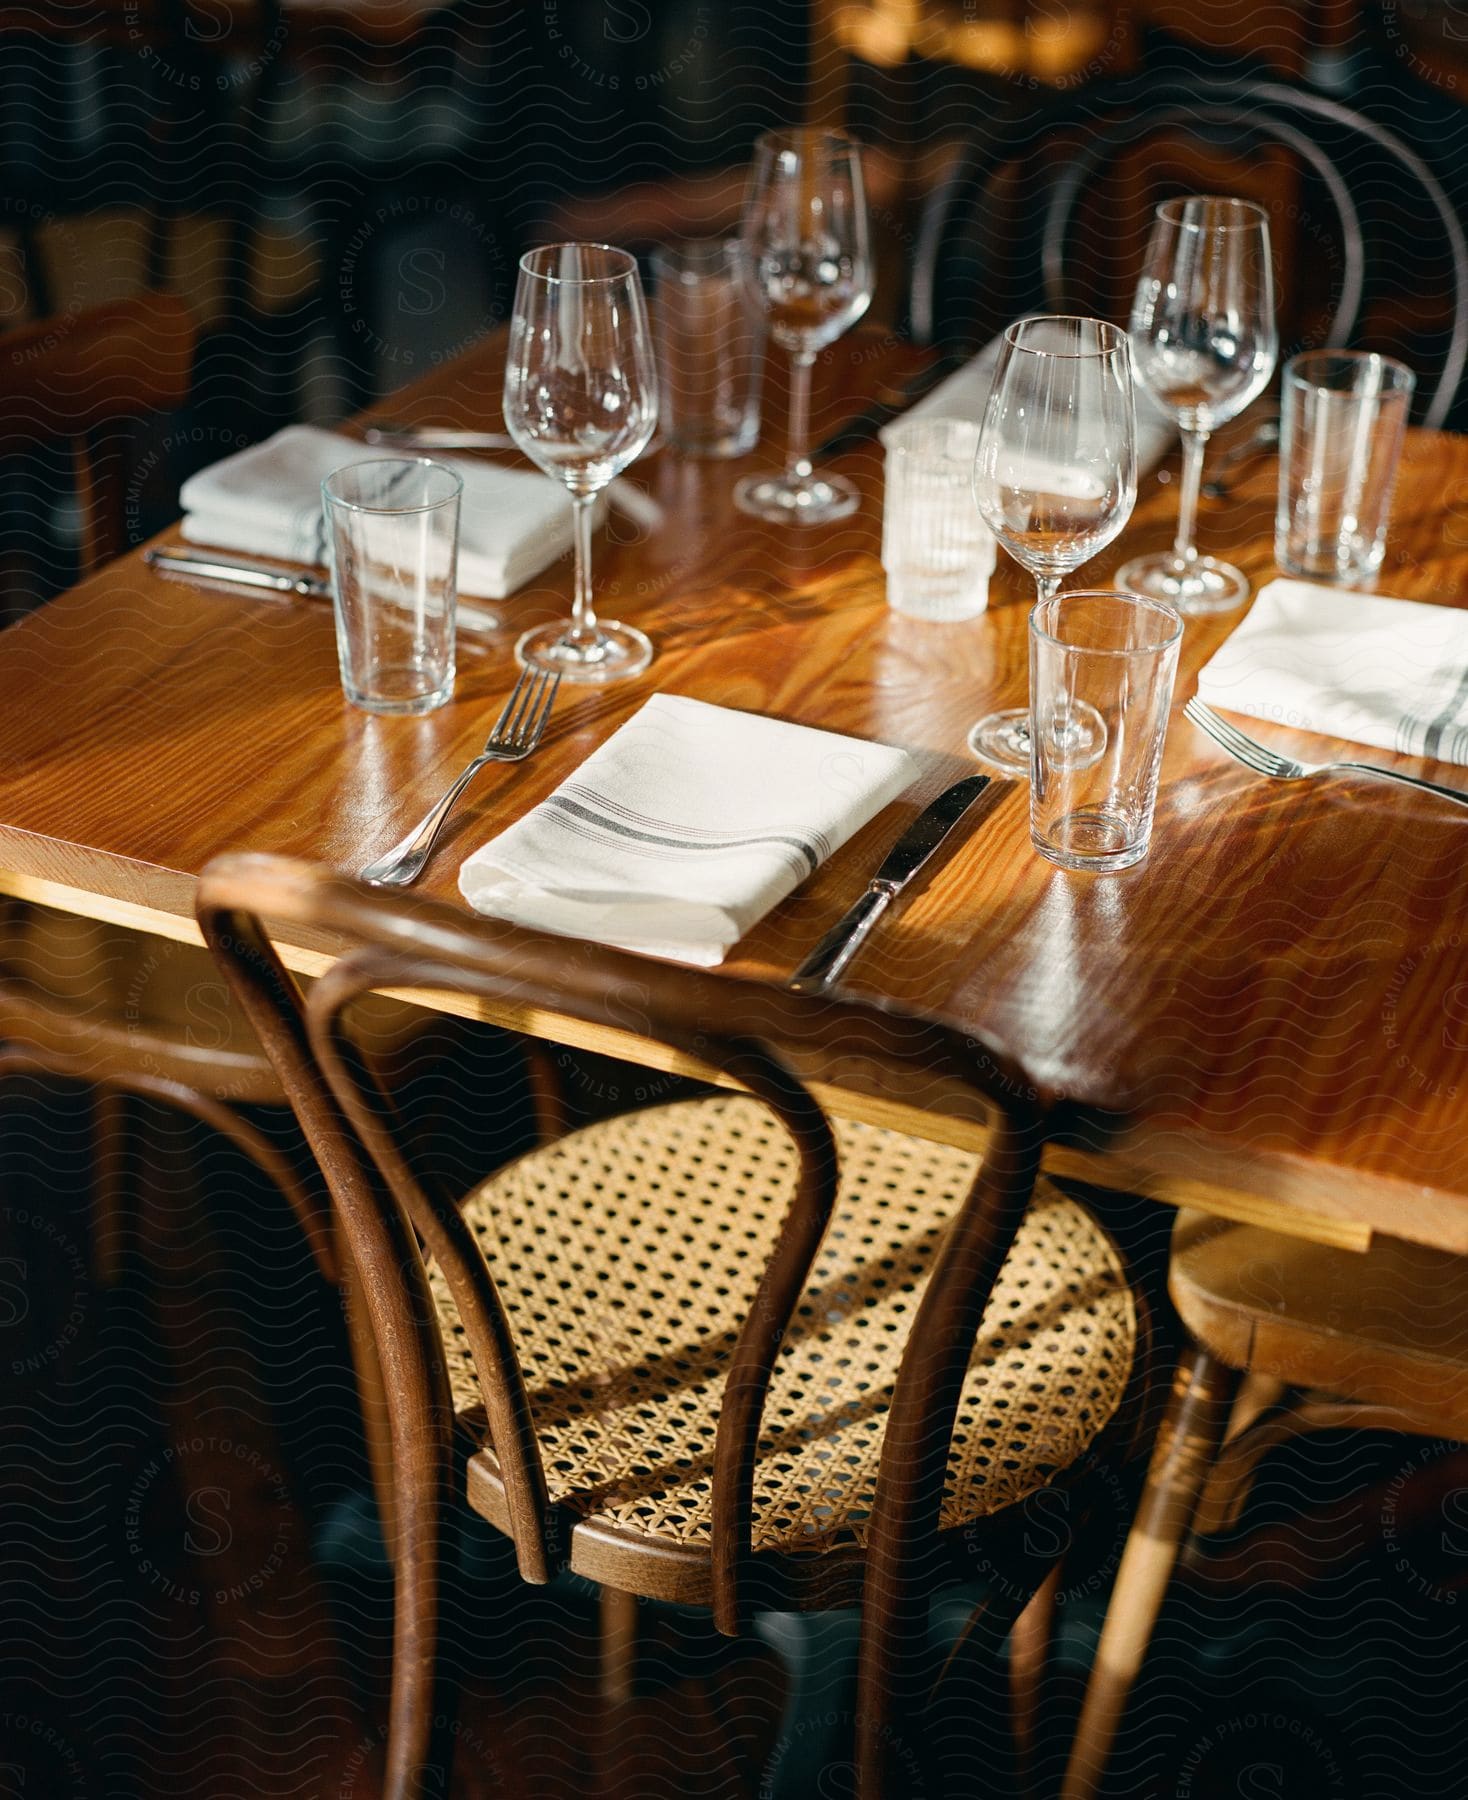 A table that is set for guests at a restaurant.